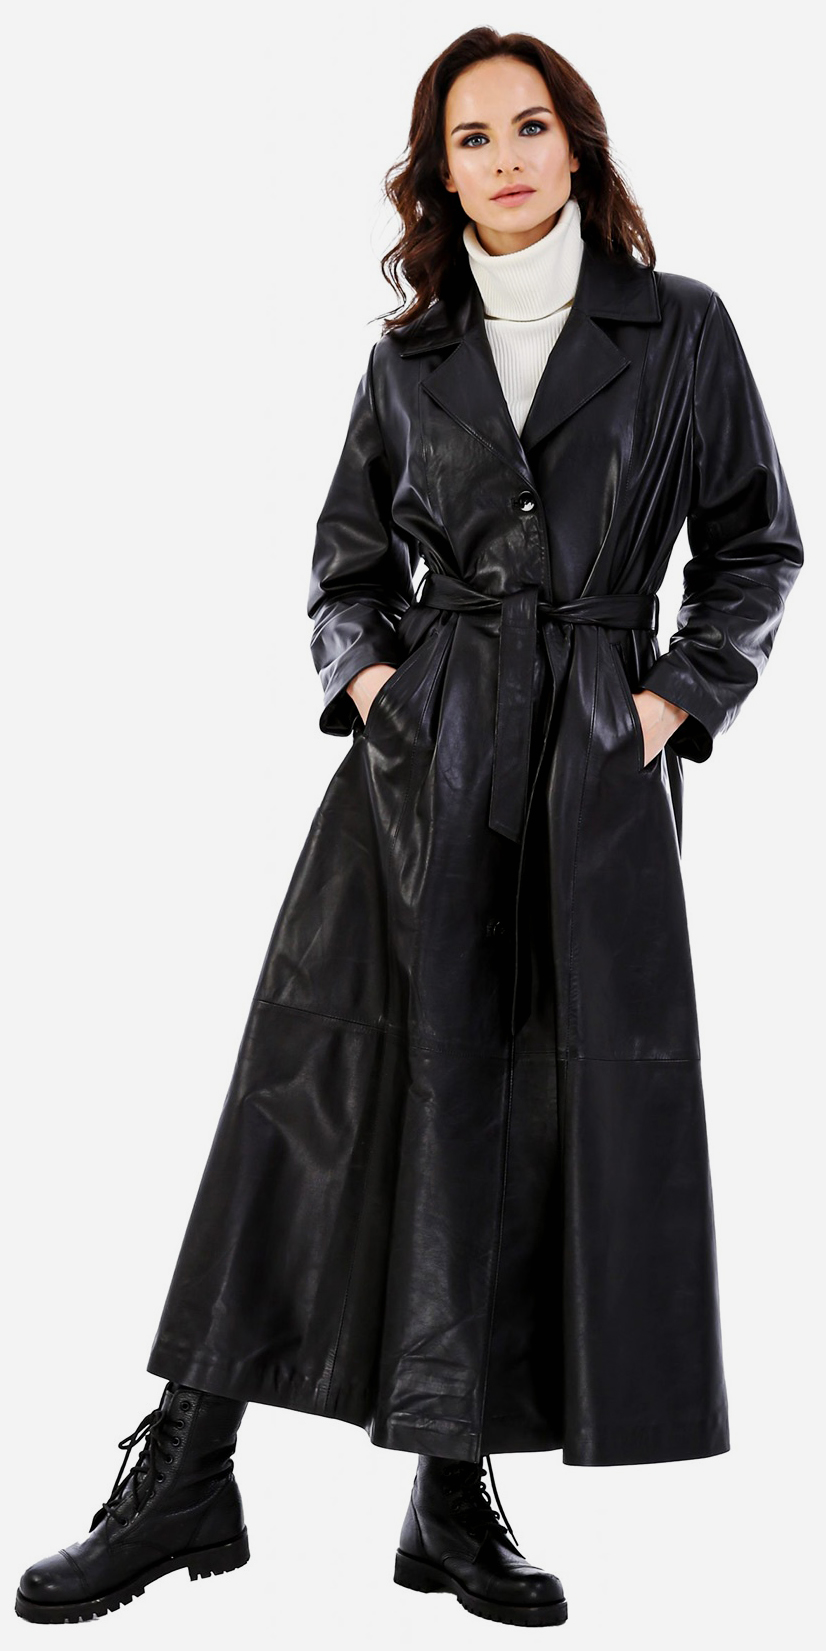 Leather Coat Daydreams: A new long leather coat!